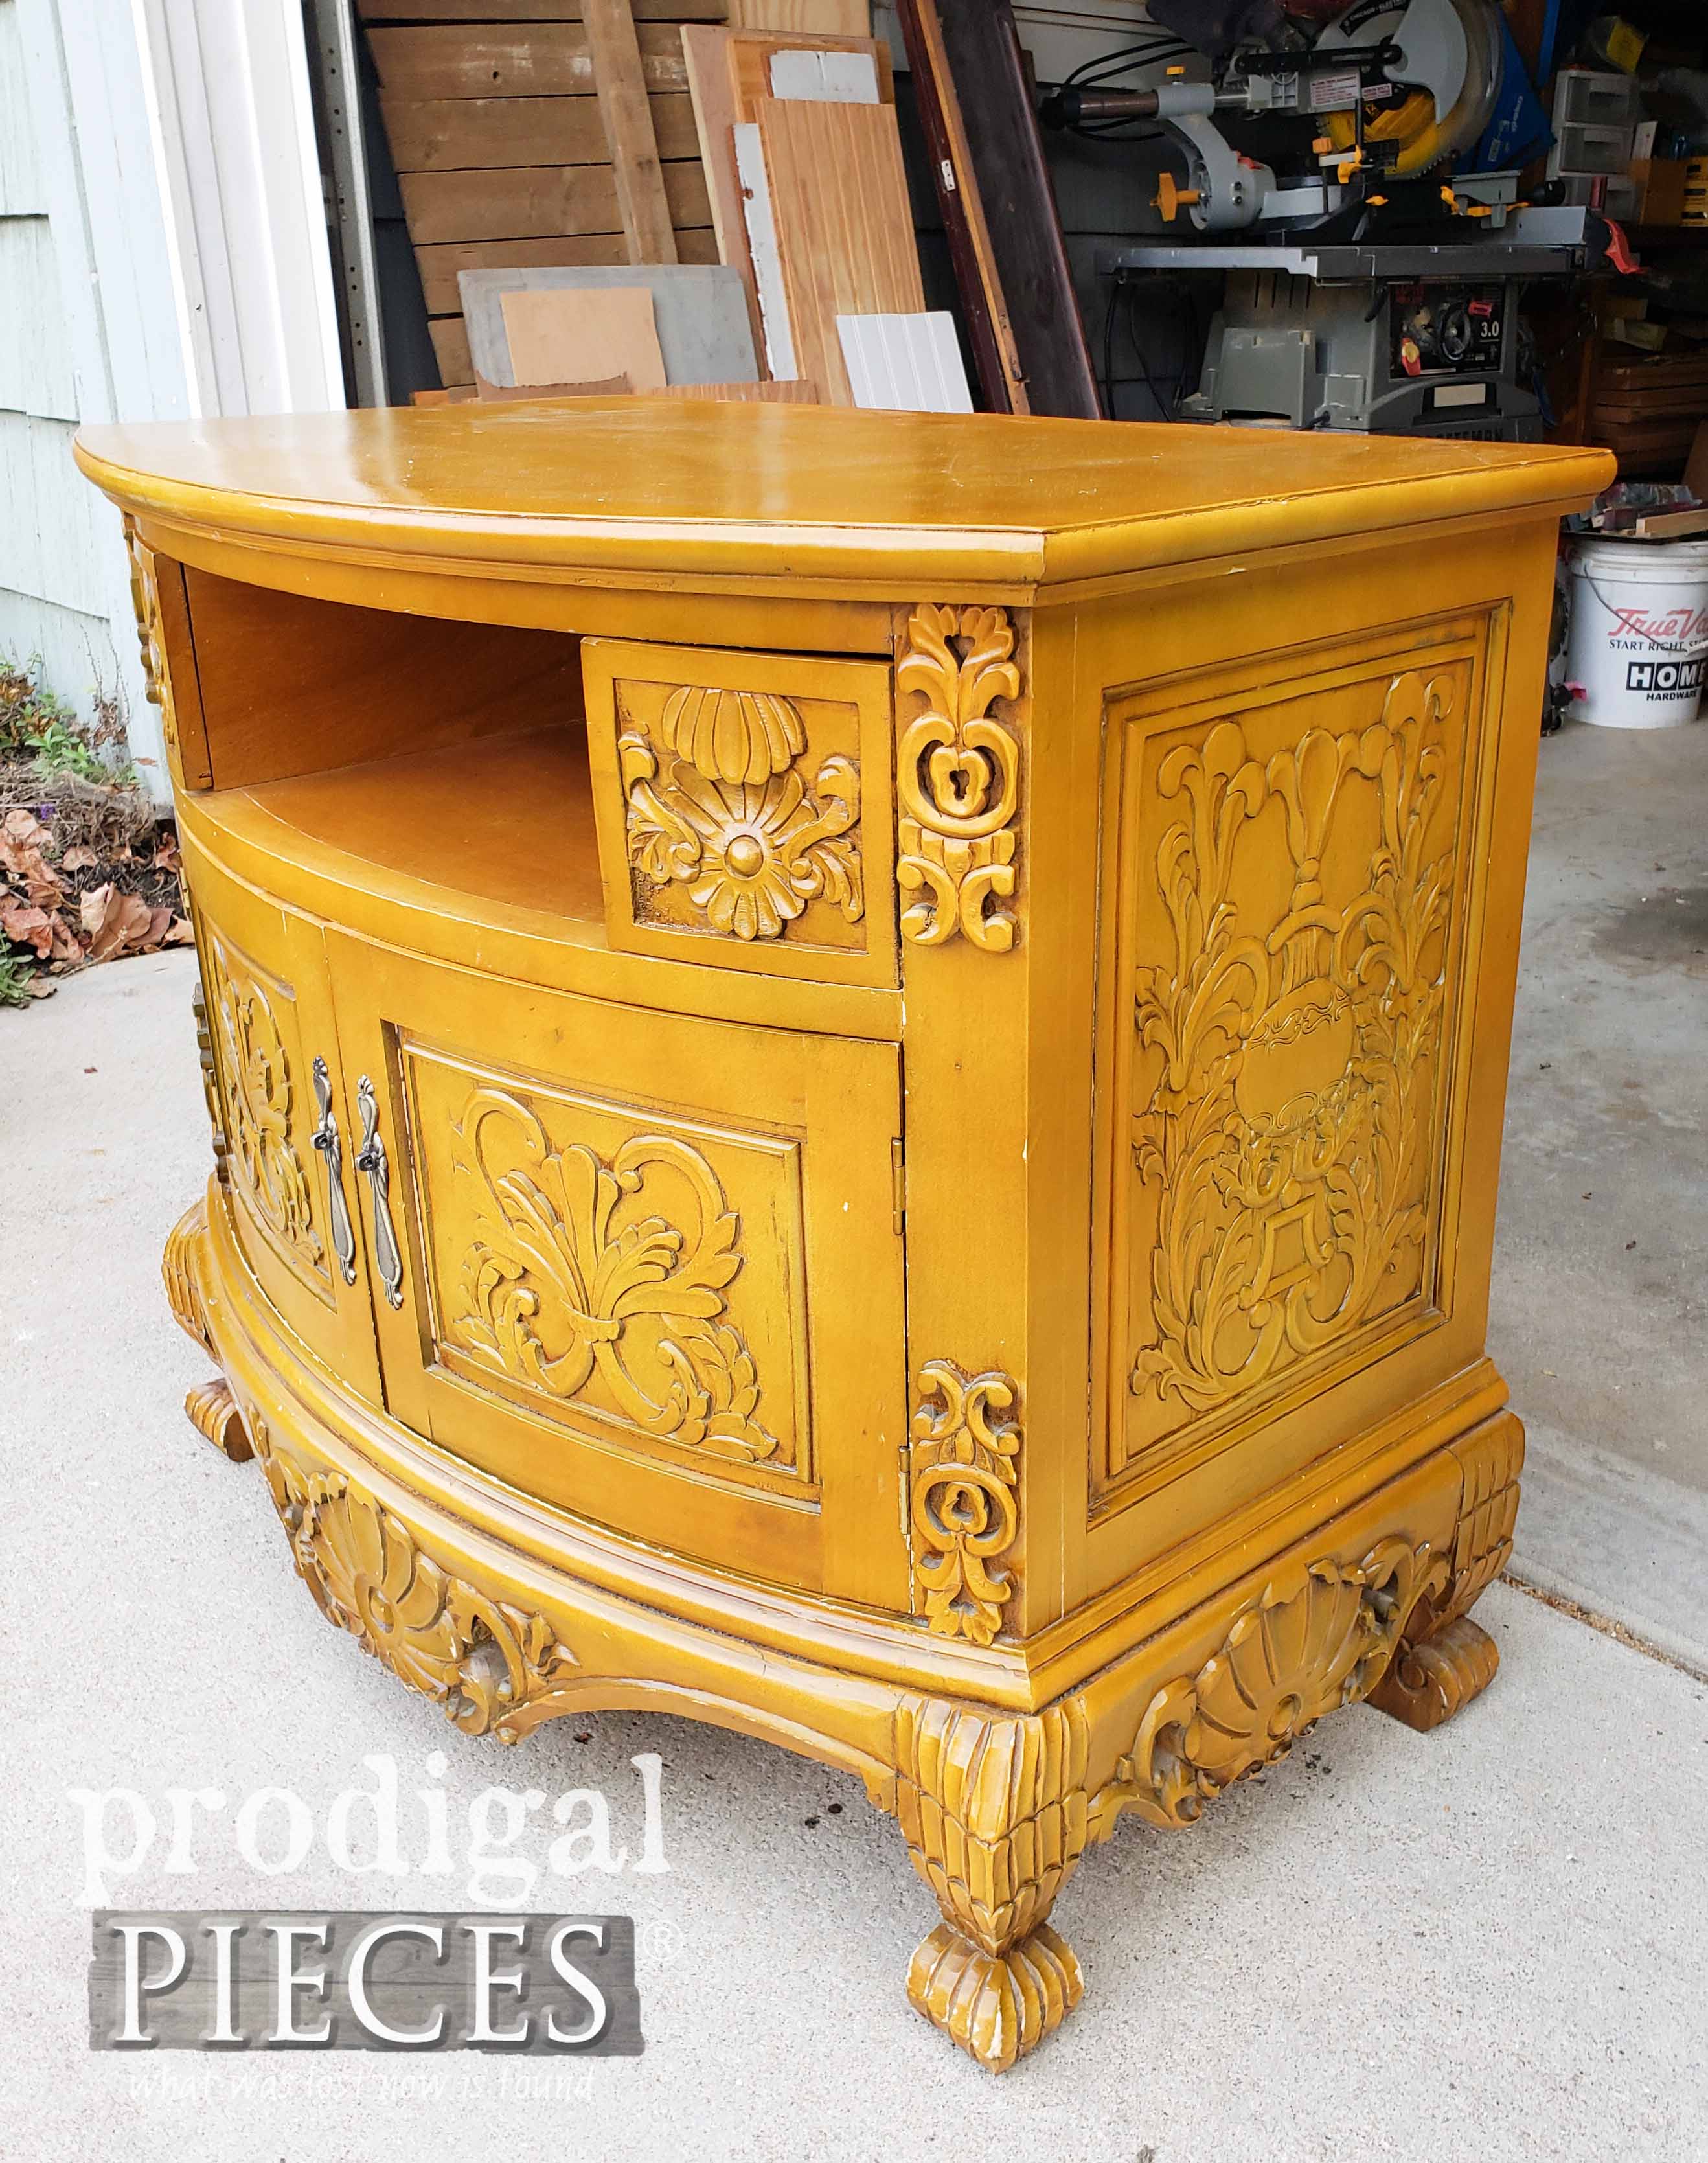 Quickly add a new look to old furniture pieces by applying a fresh coat of paint! Larissa with Prodigal Pieces has the simple details for this tutorial.